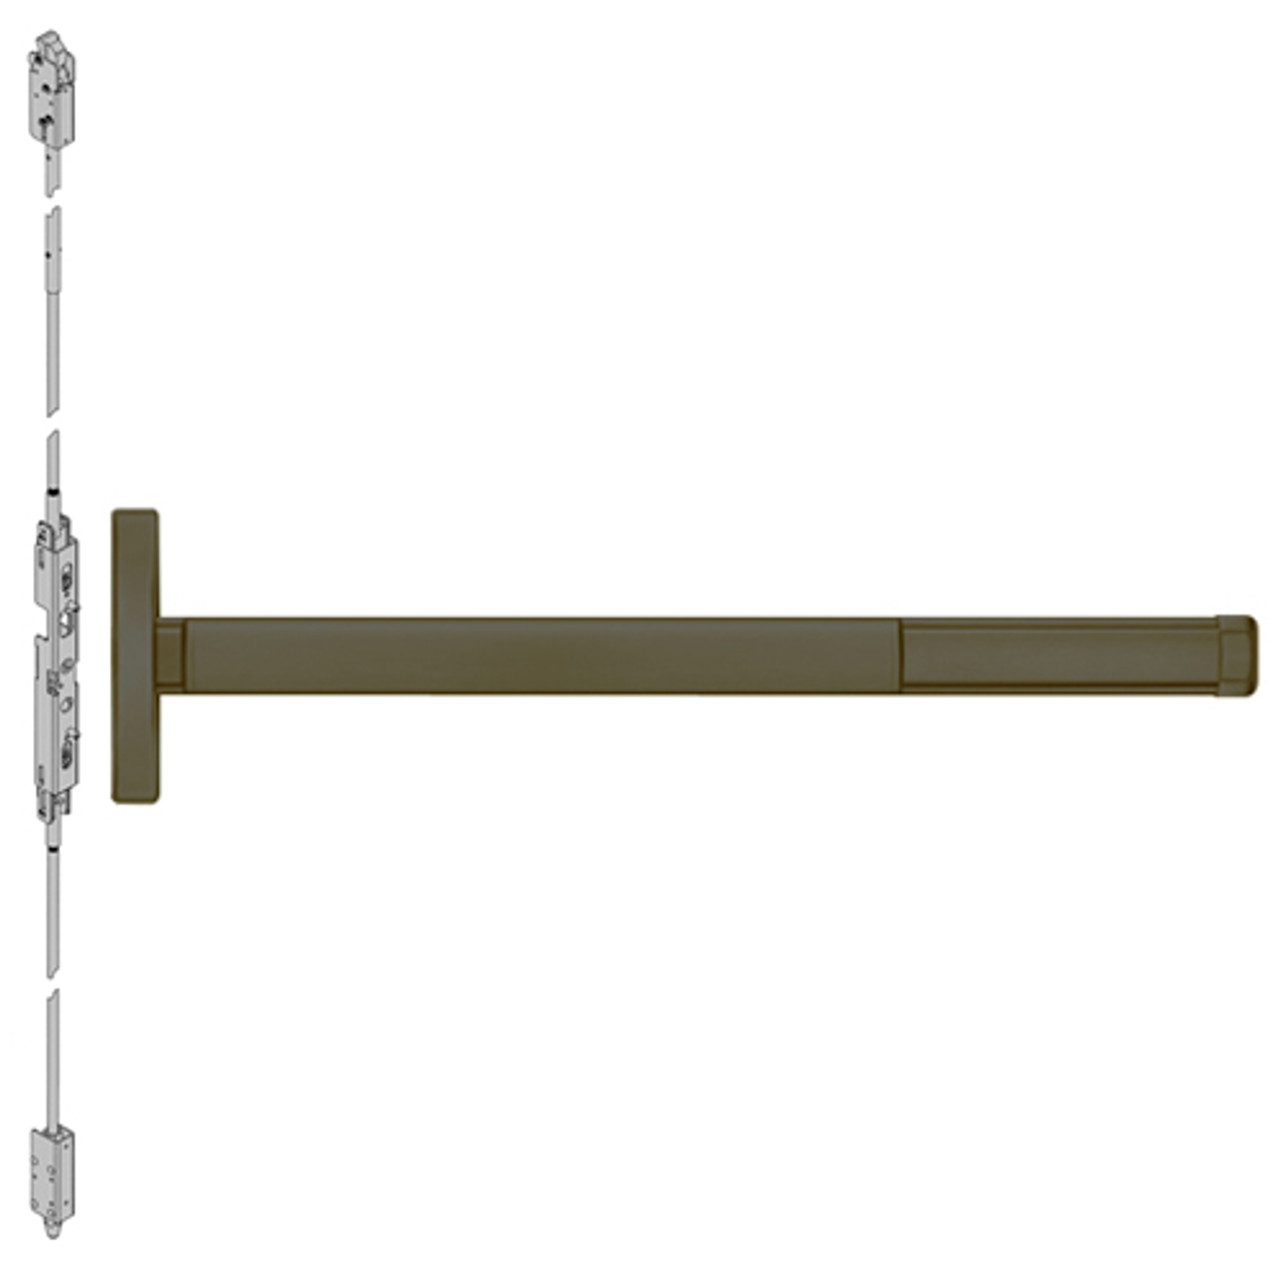 2602LBRCD-613-36 PHI 2600 Series Non Fire Rated Concealed Vertical Rod Exit Device Prepped for Dummy Trim with Cylinder Dogging and LBR in Oil Rubbed Bronze Finish